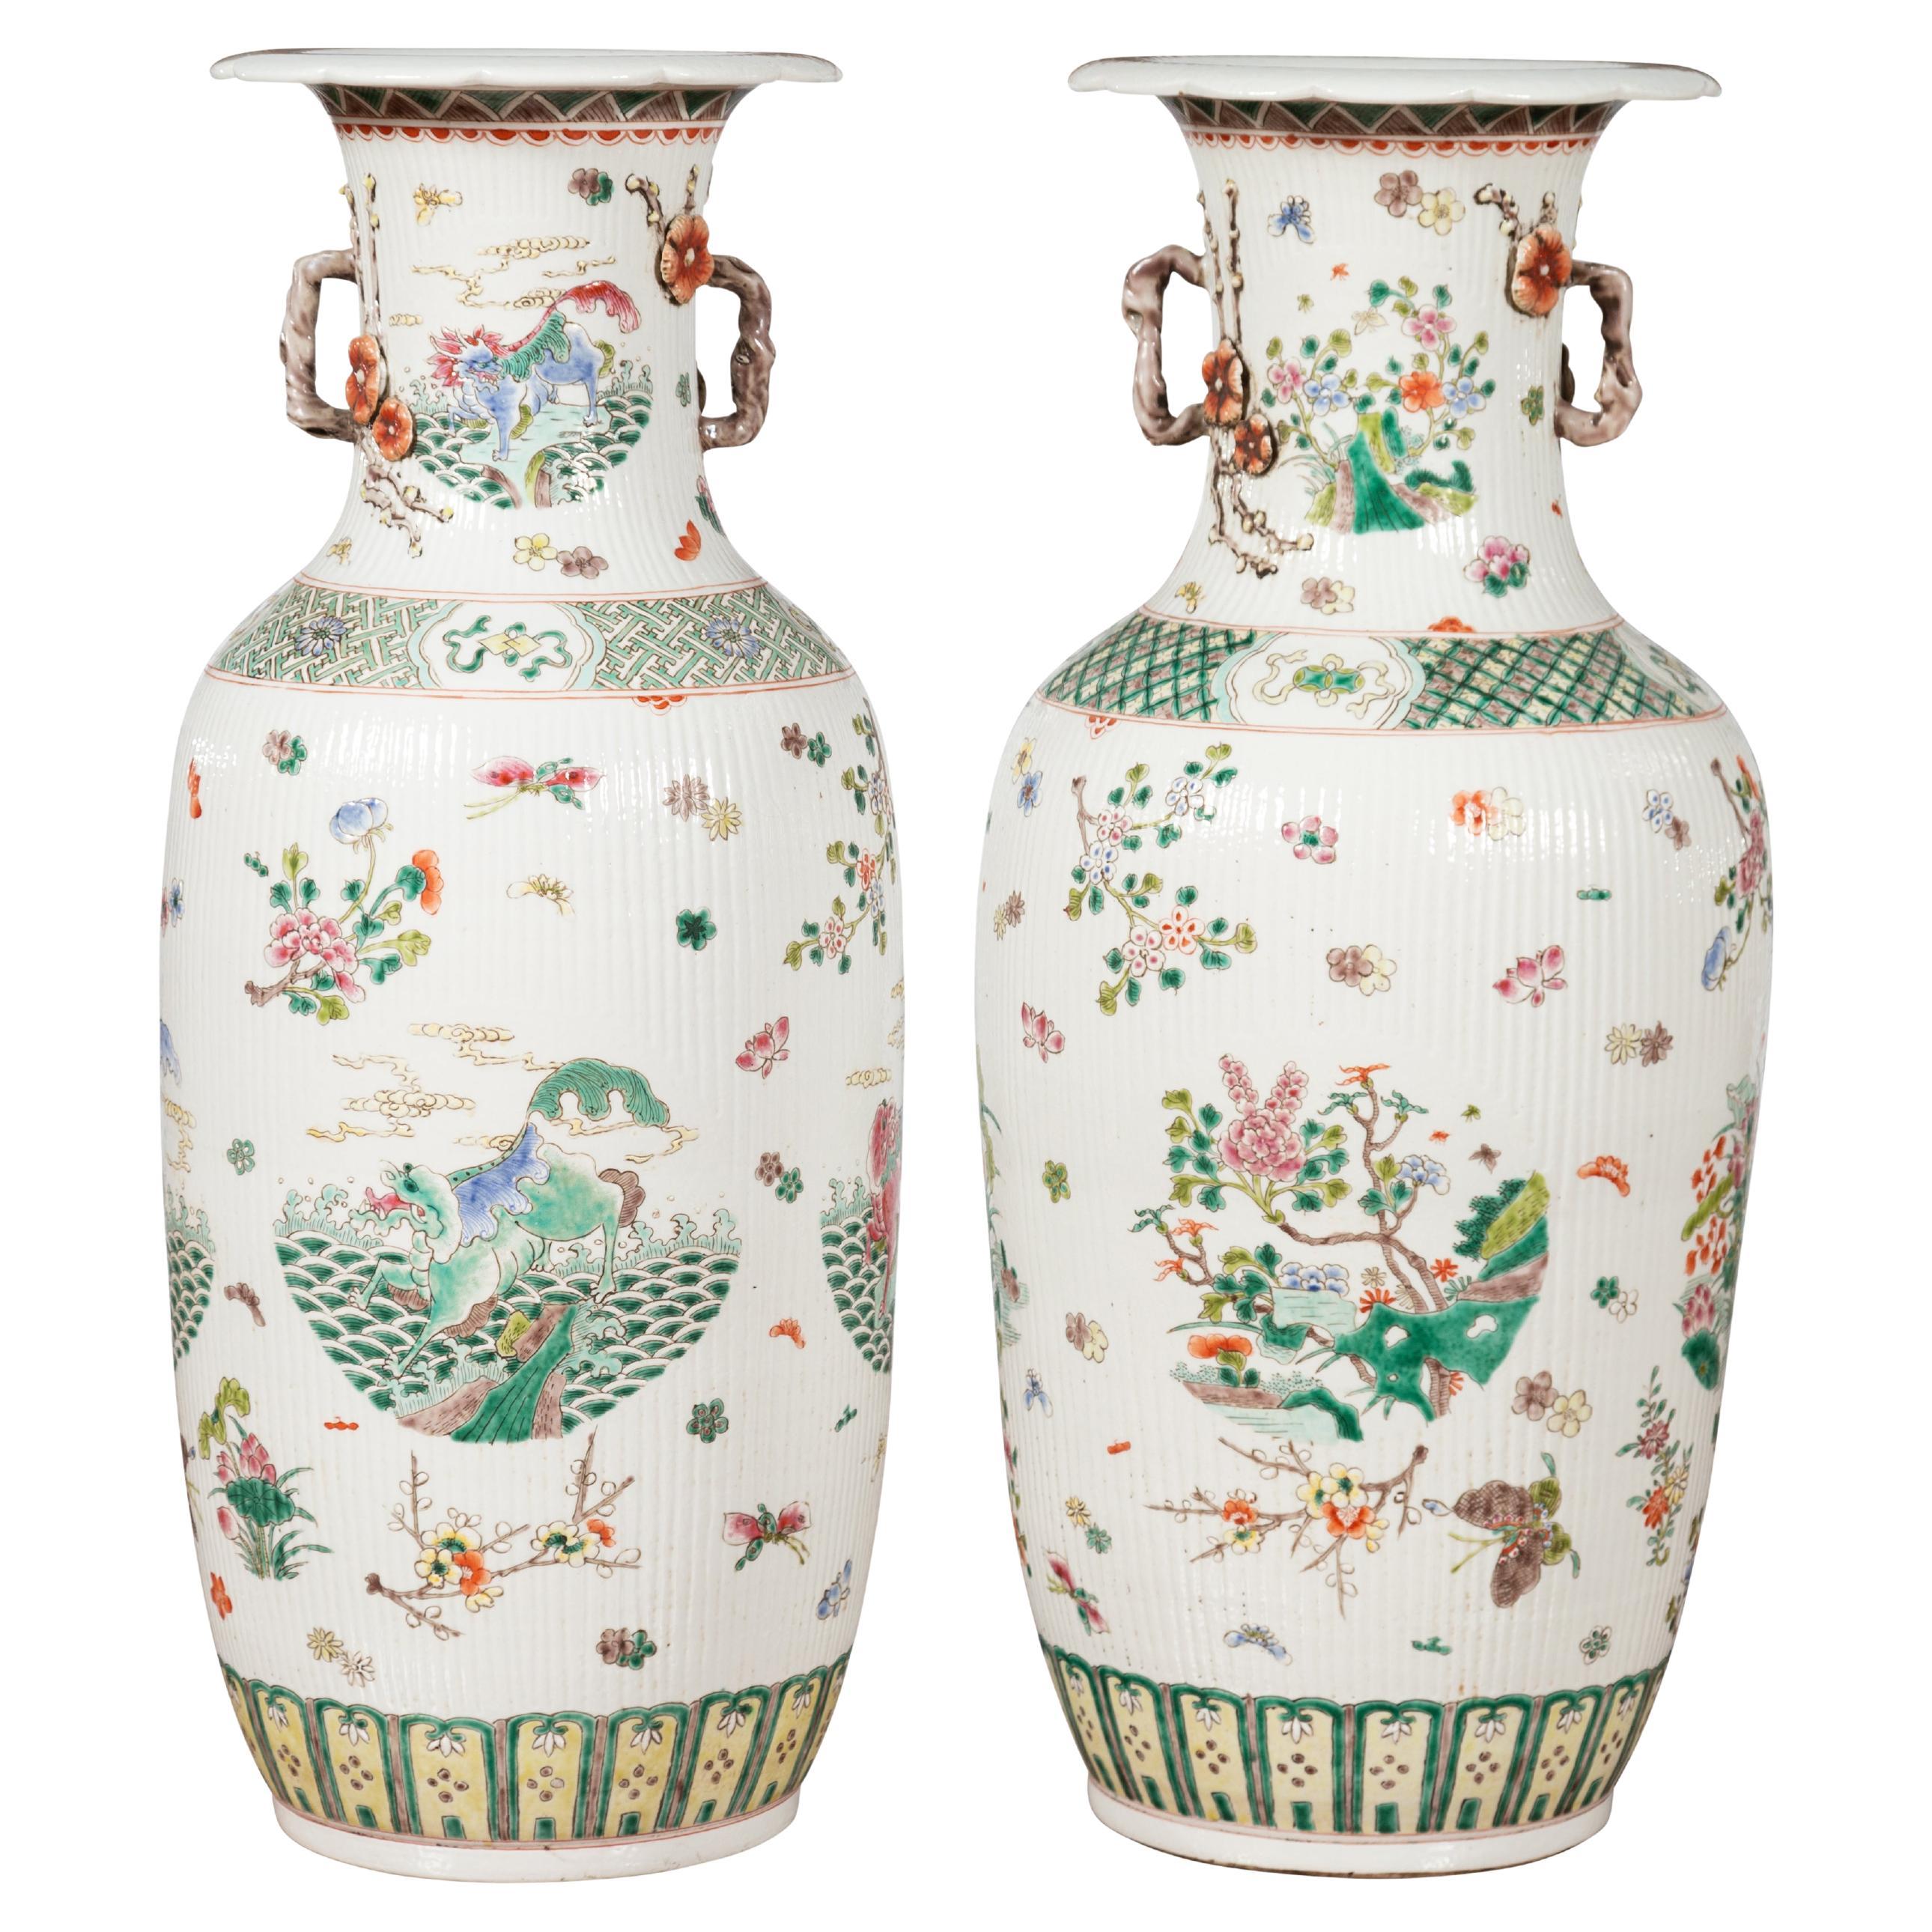 Antique Chinese Porcelain Vases with Hand-Painted Flowers and Mythical Animals